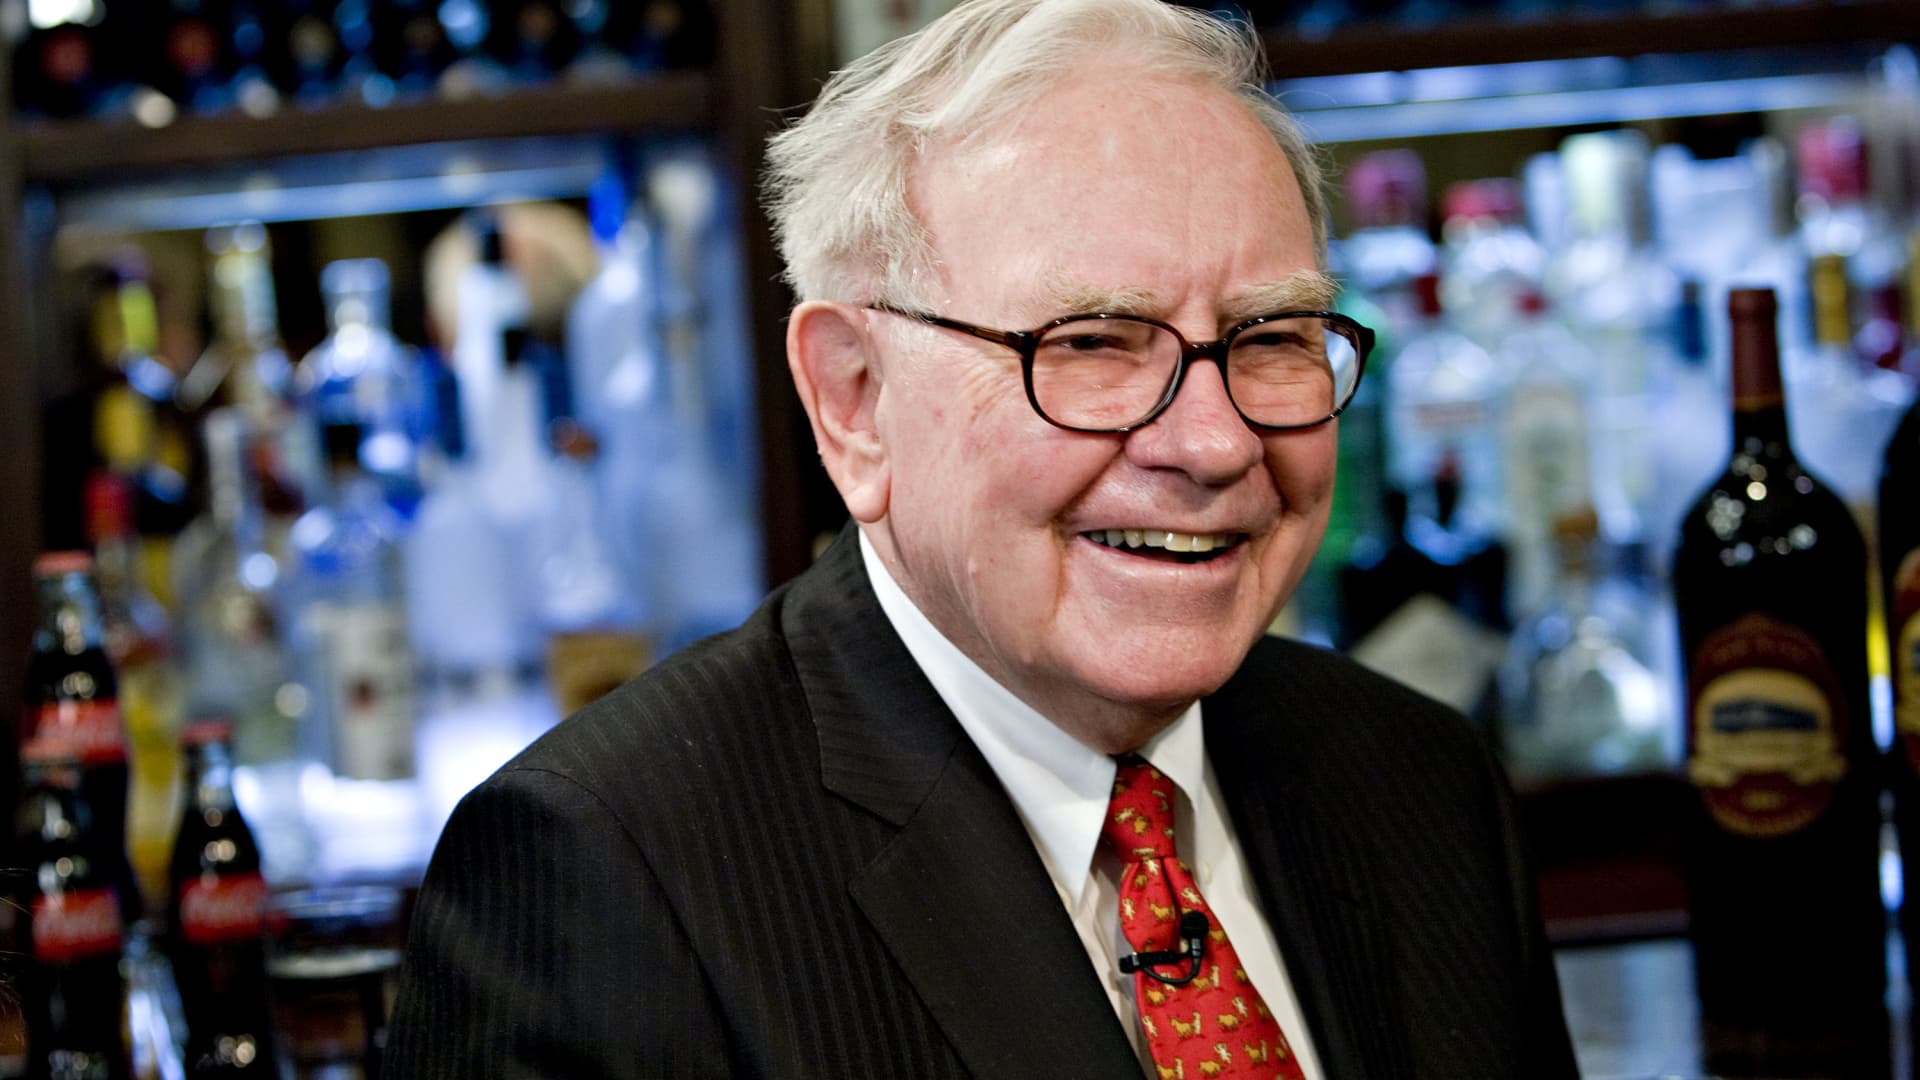 Buffett’s buying spree may continue — Here’s what Wall Street analysts say about the Alleghany deal